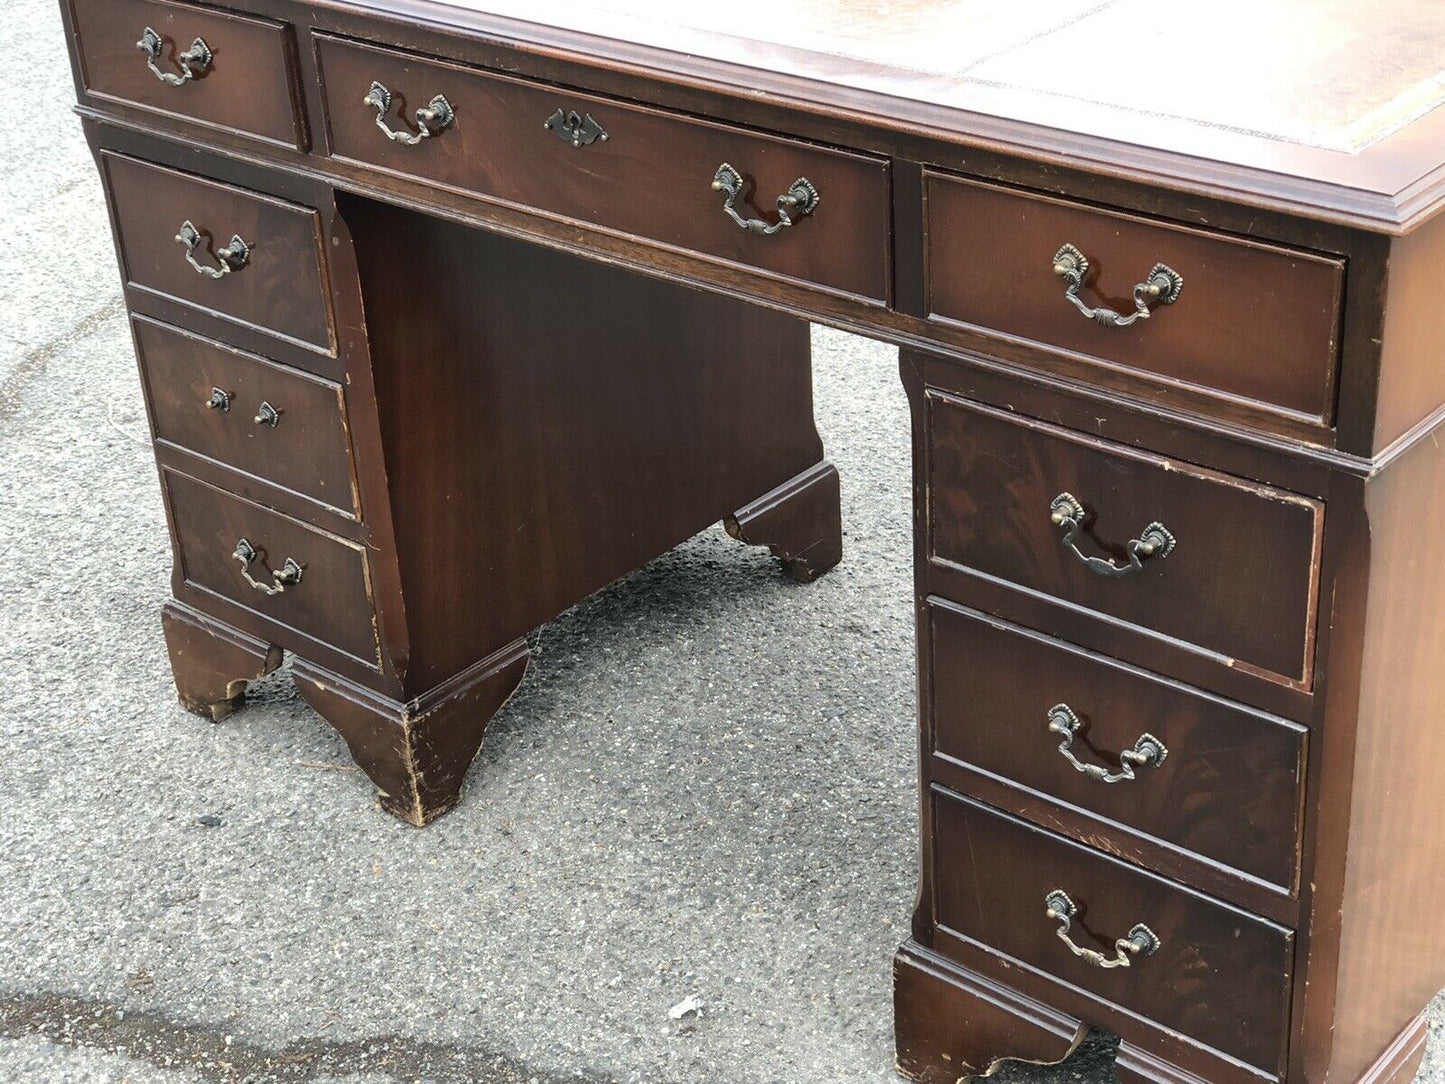 Pedestal Desk With Tan Leather Top.